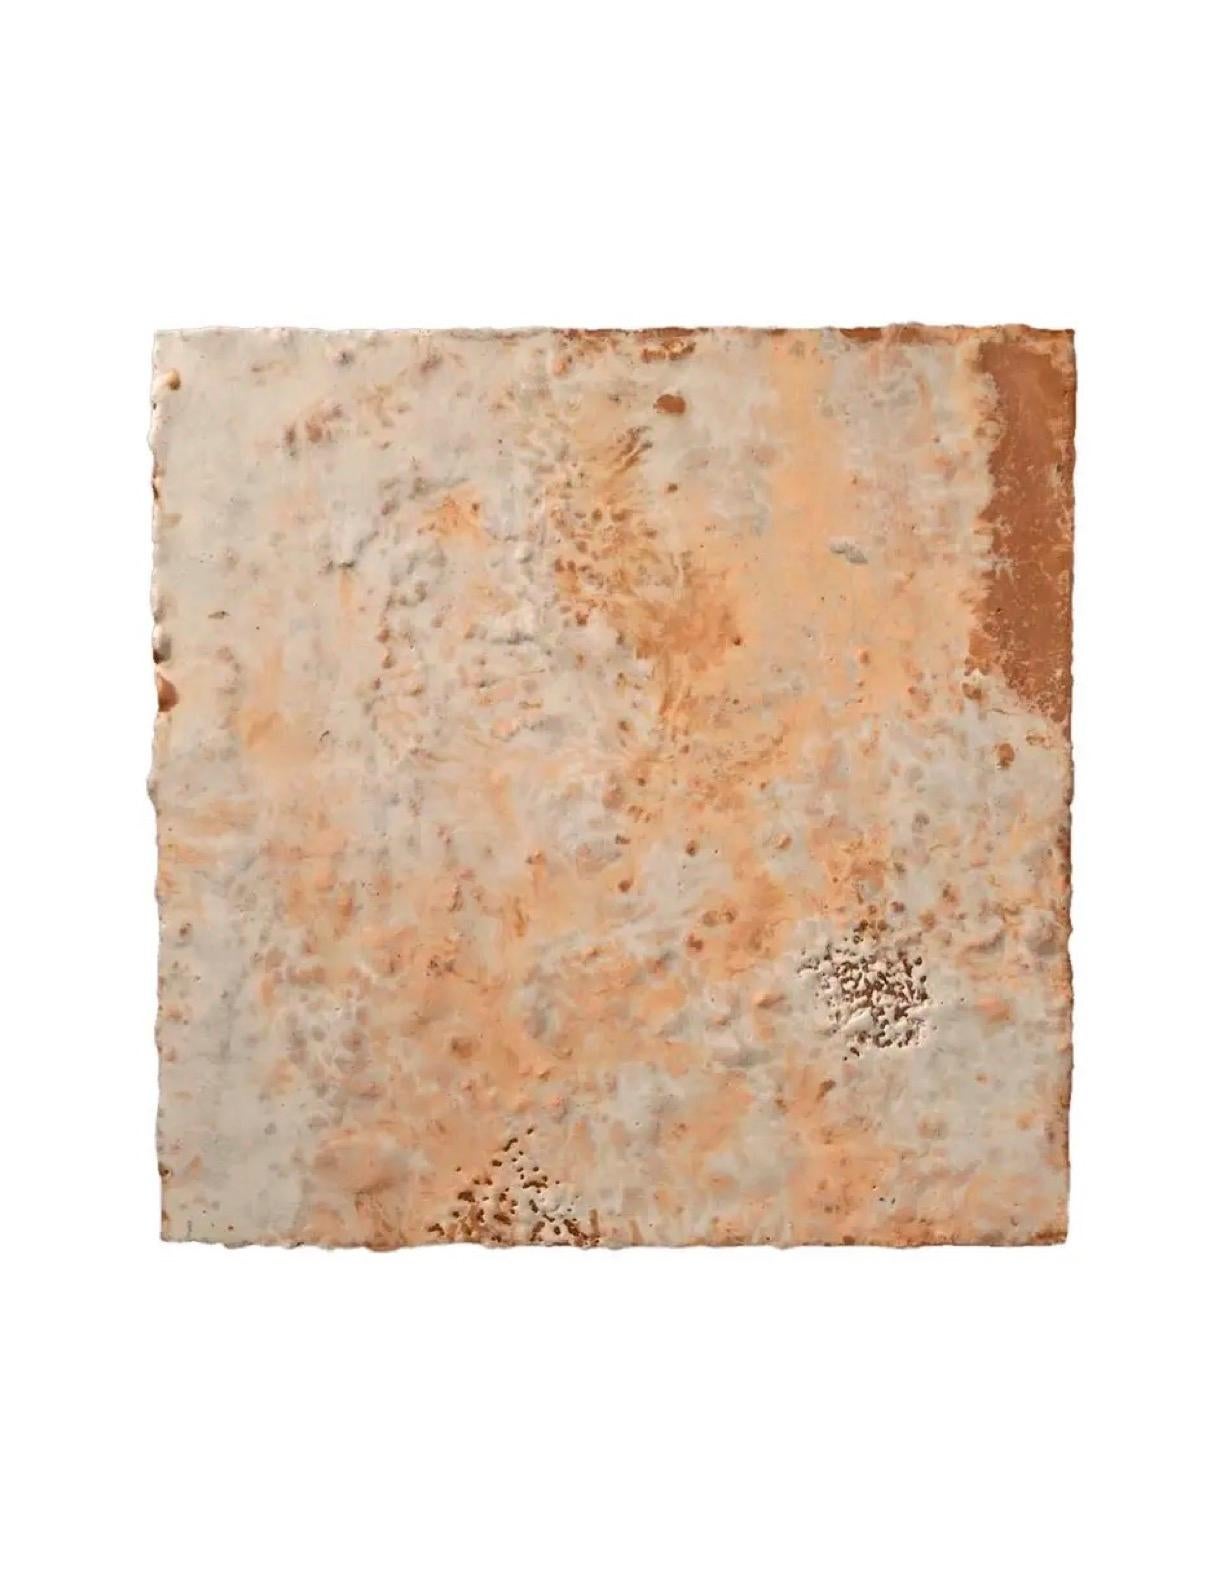 Modern Richard Hirsch Encaustic Painting of Nothing #29, 2012 For Sale